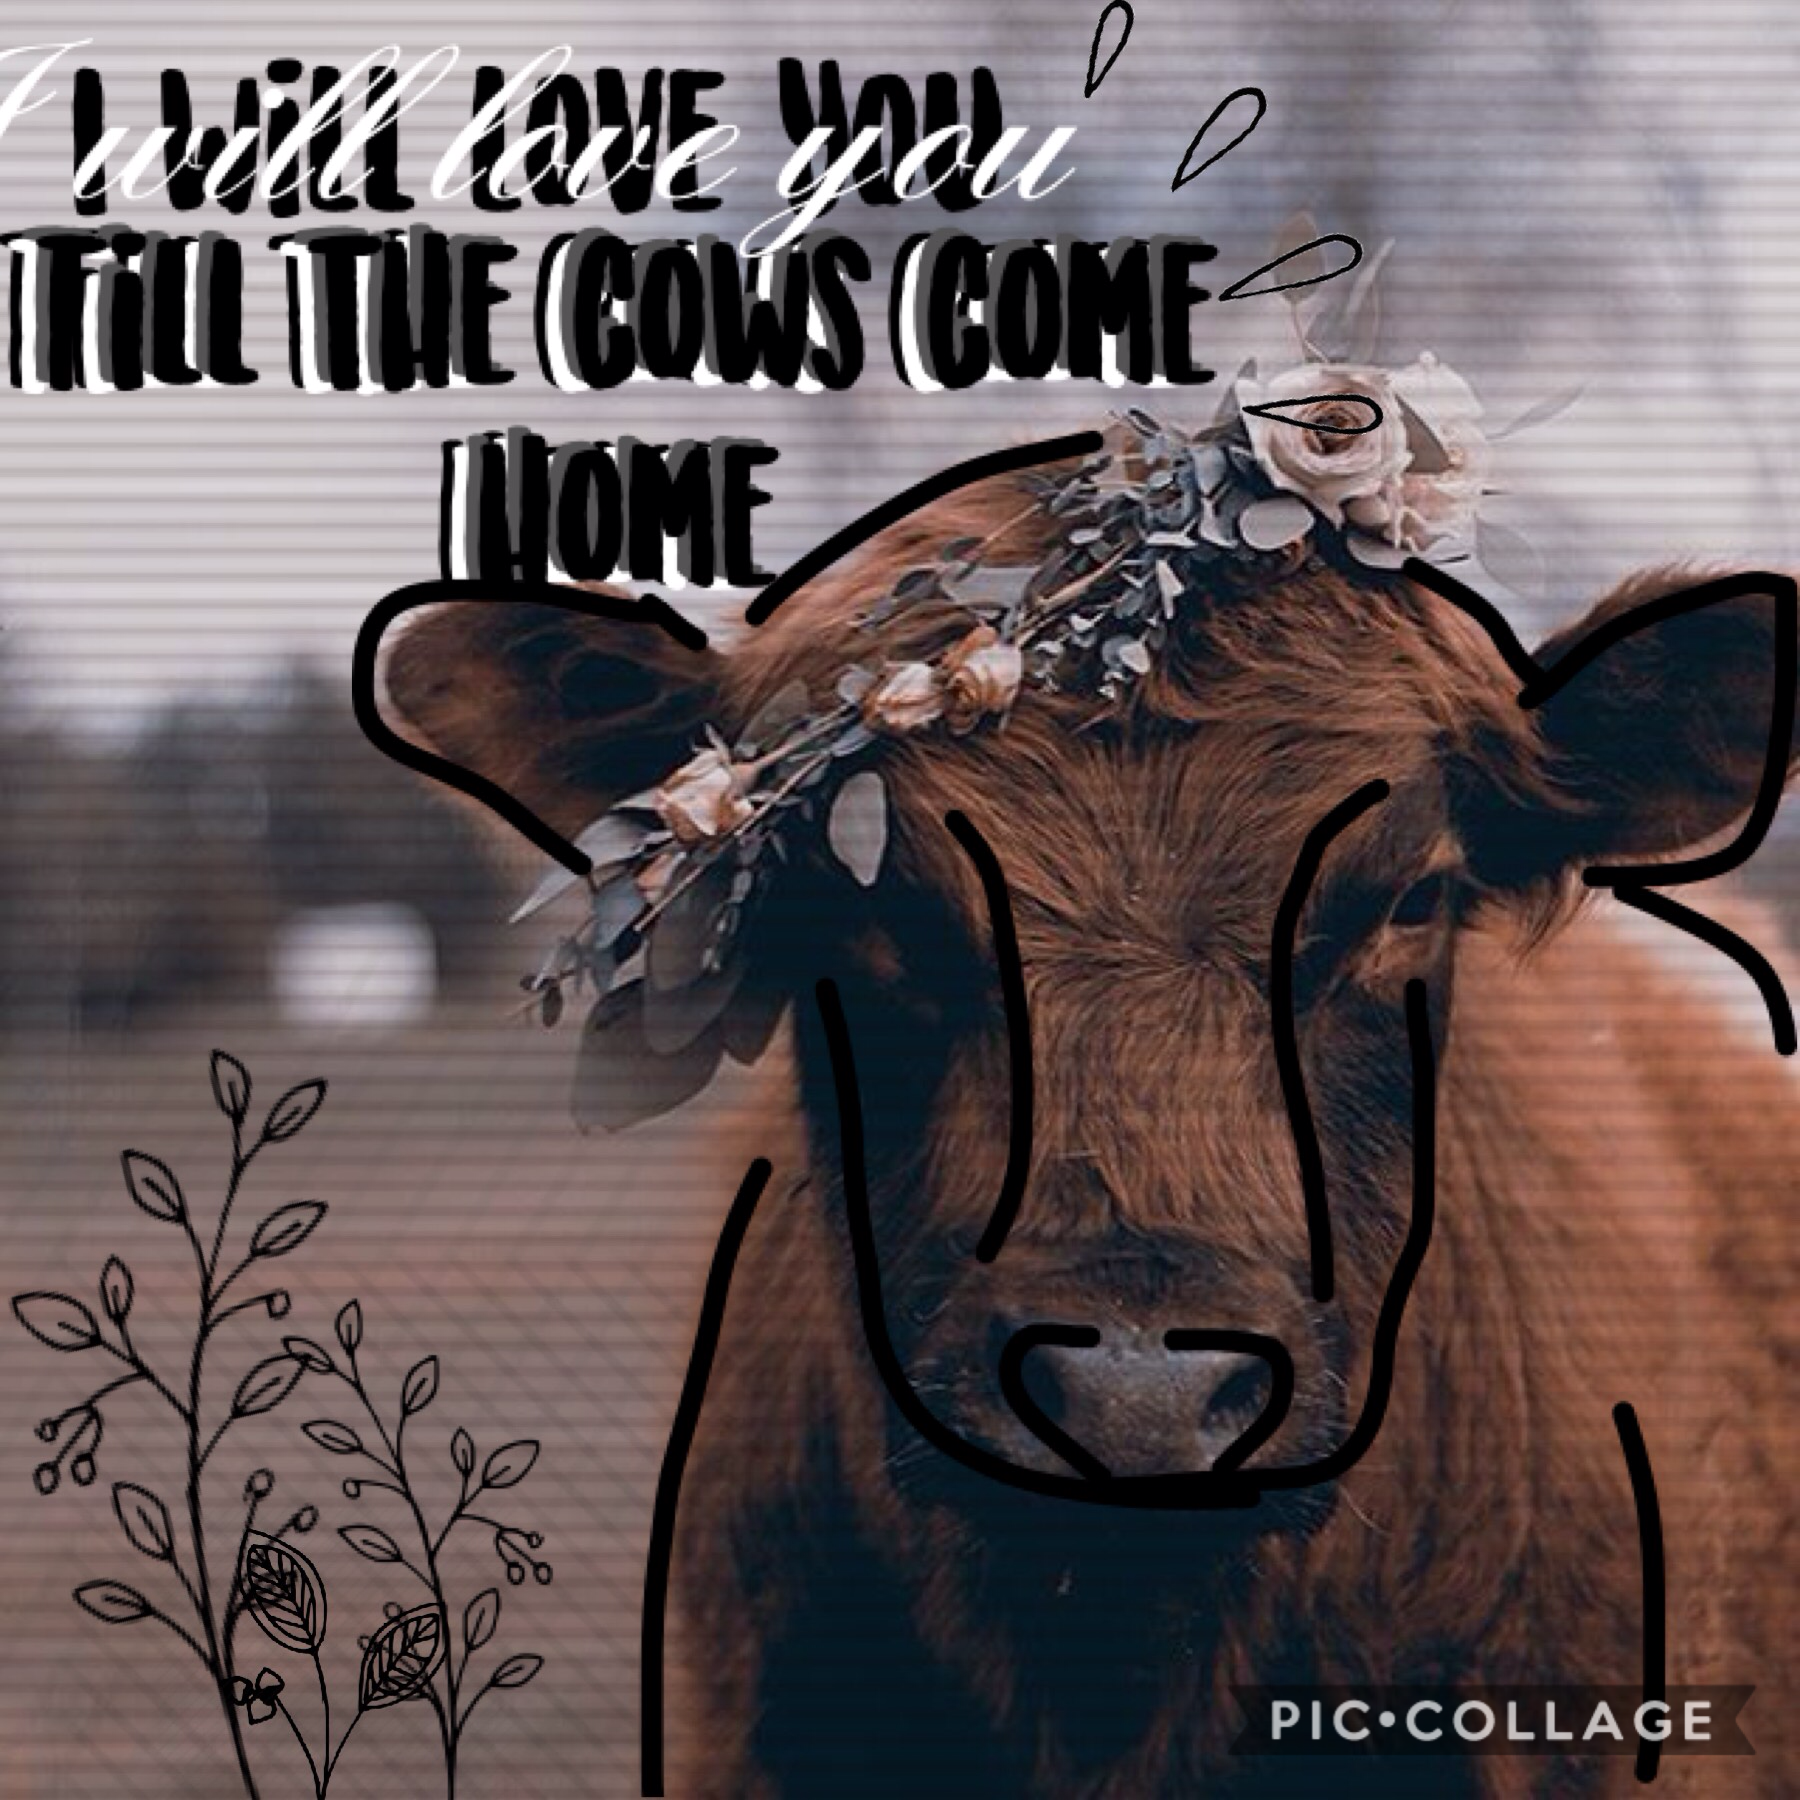 🐮Tapity tap🐮
Entry to @ magpiebald12's contest x